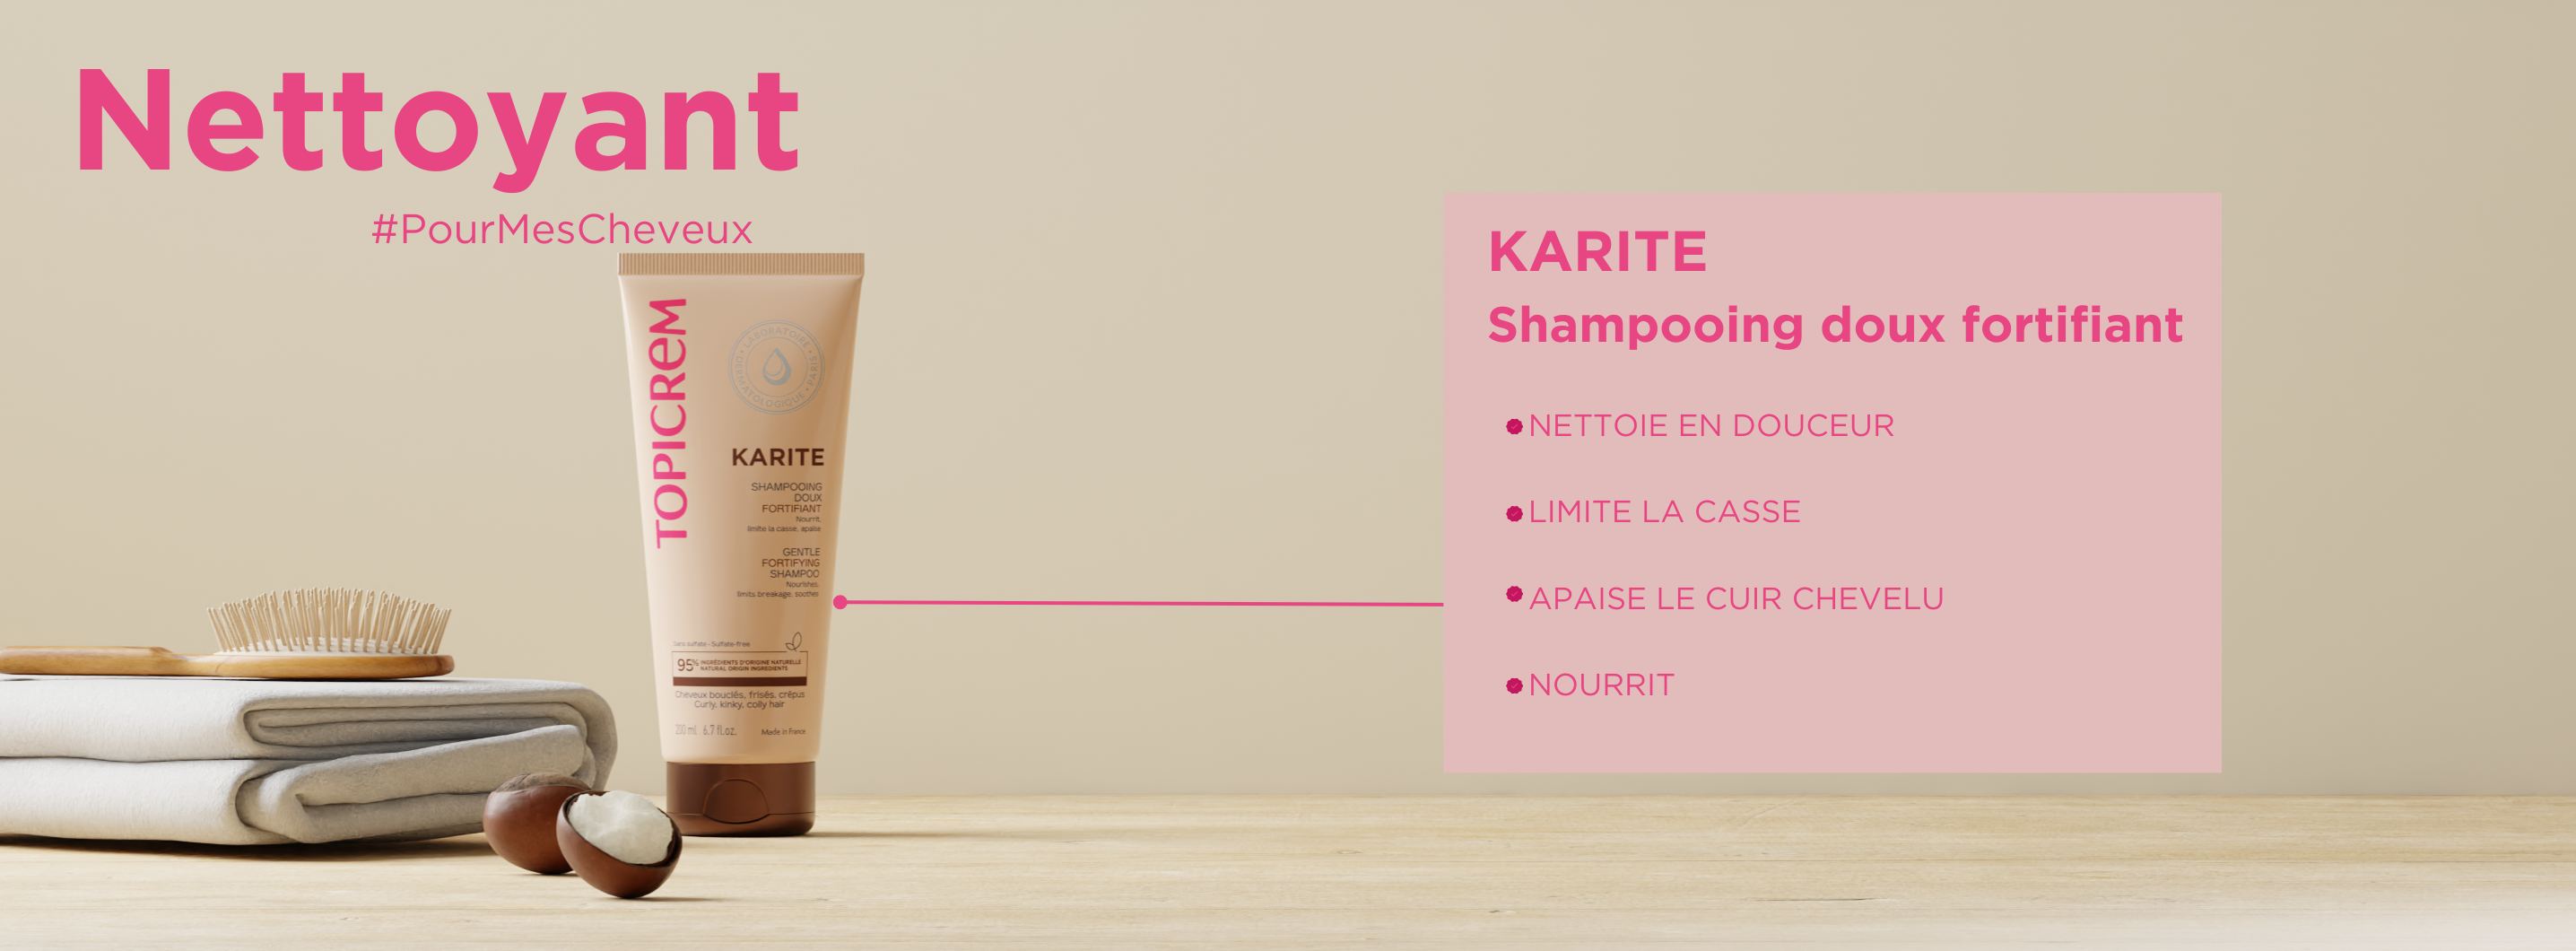 SHAMPOOING DOUX FORTIFIANT